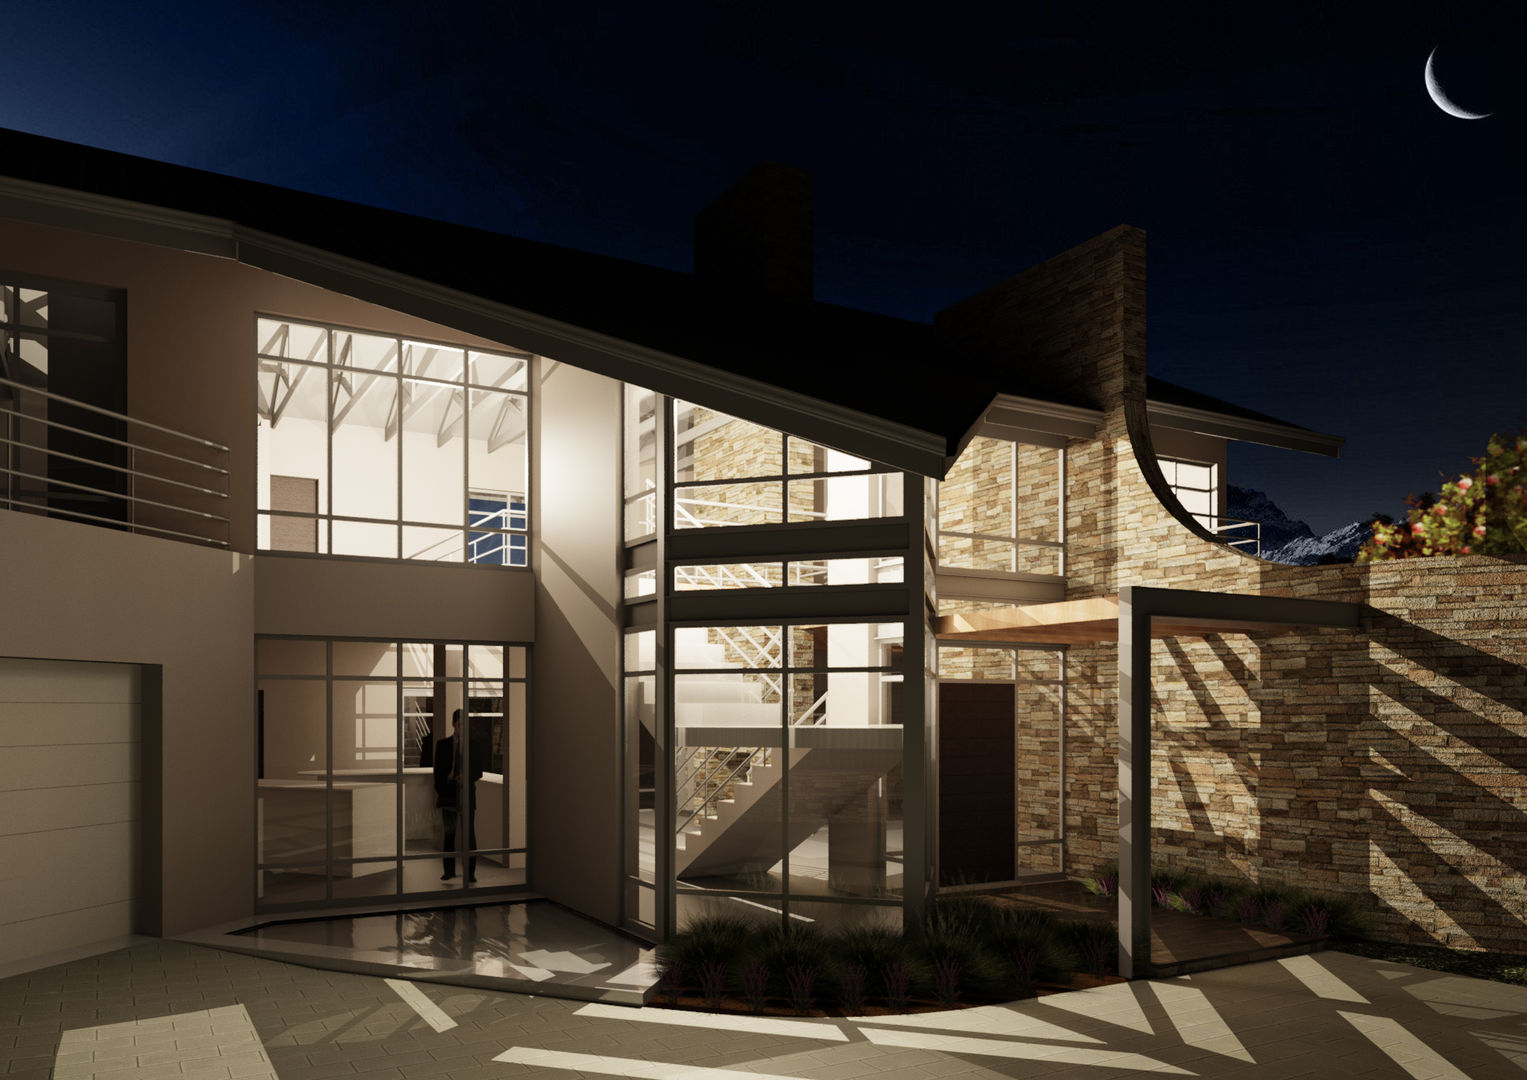 NIGHT VIEW OF MAIN ENTRANCE AND STAIRS Nuclei Lifestyle Design Bungalows modern,window,stairs,stone wall,family home